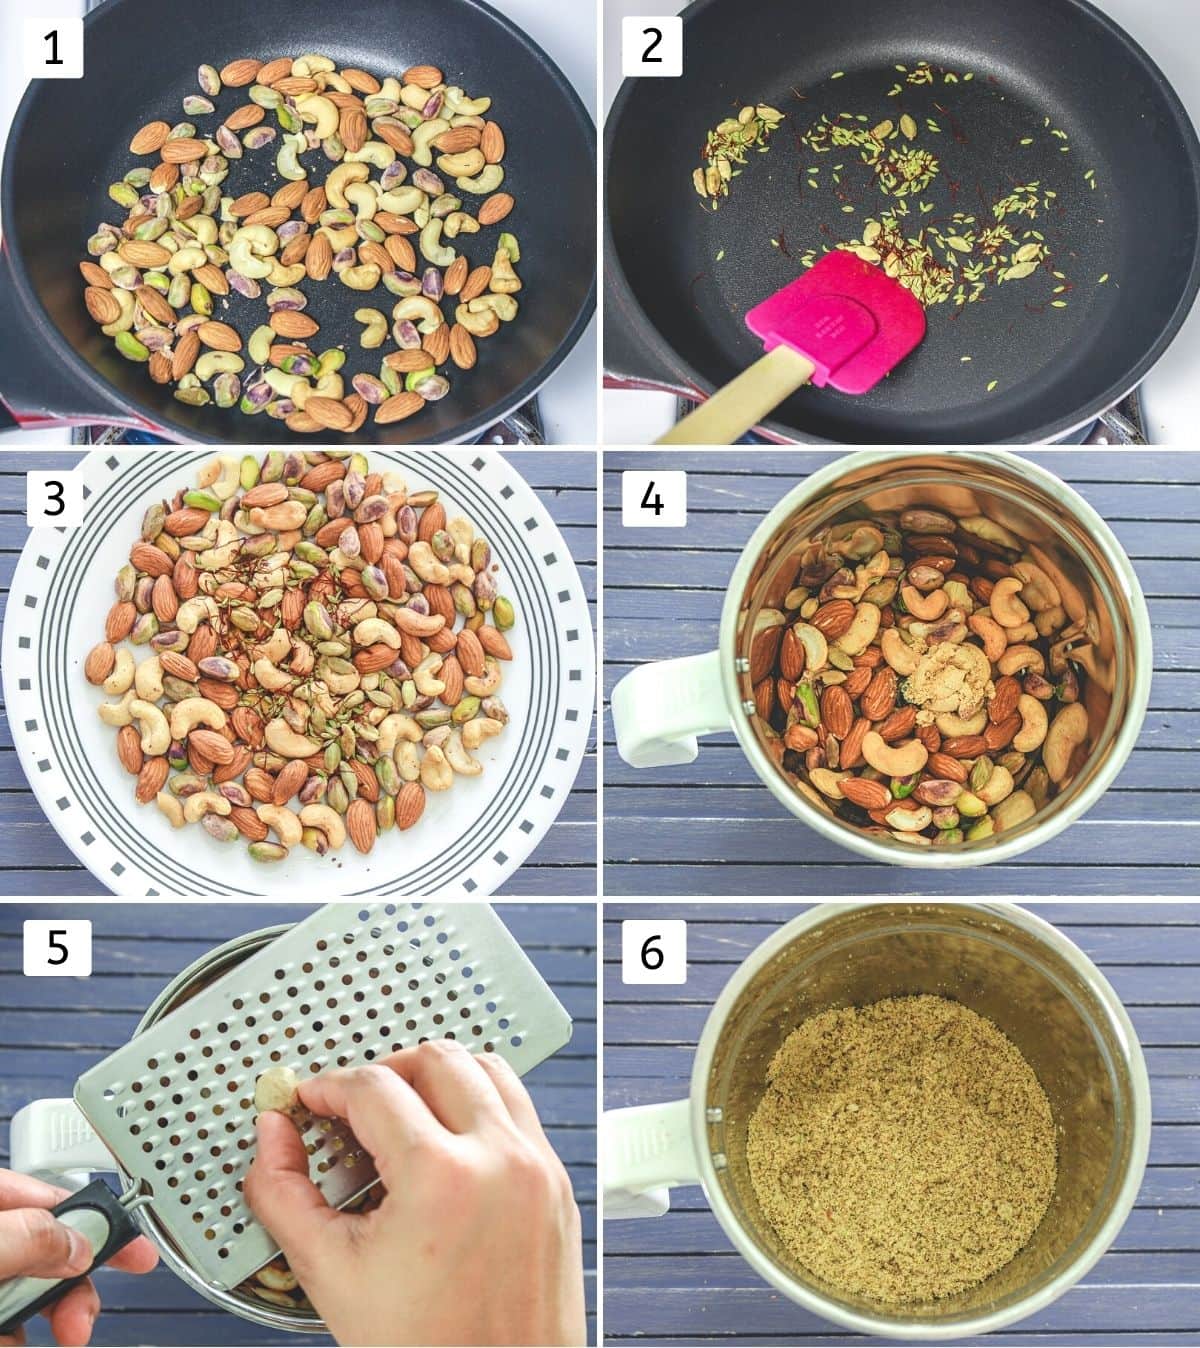 Collage of 6 images showing dry roasting nuts and spices, added to the grinder and powder ready.